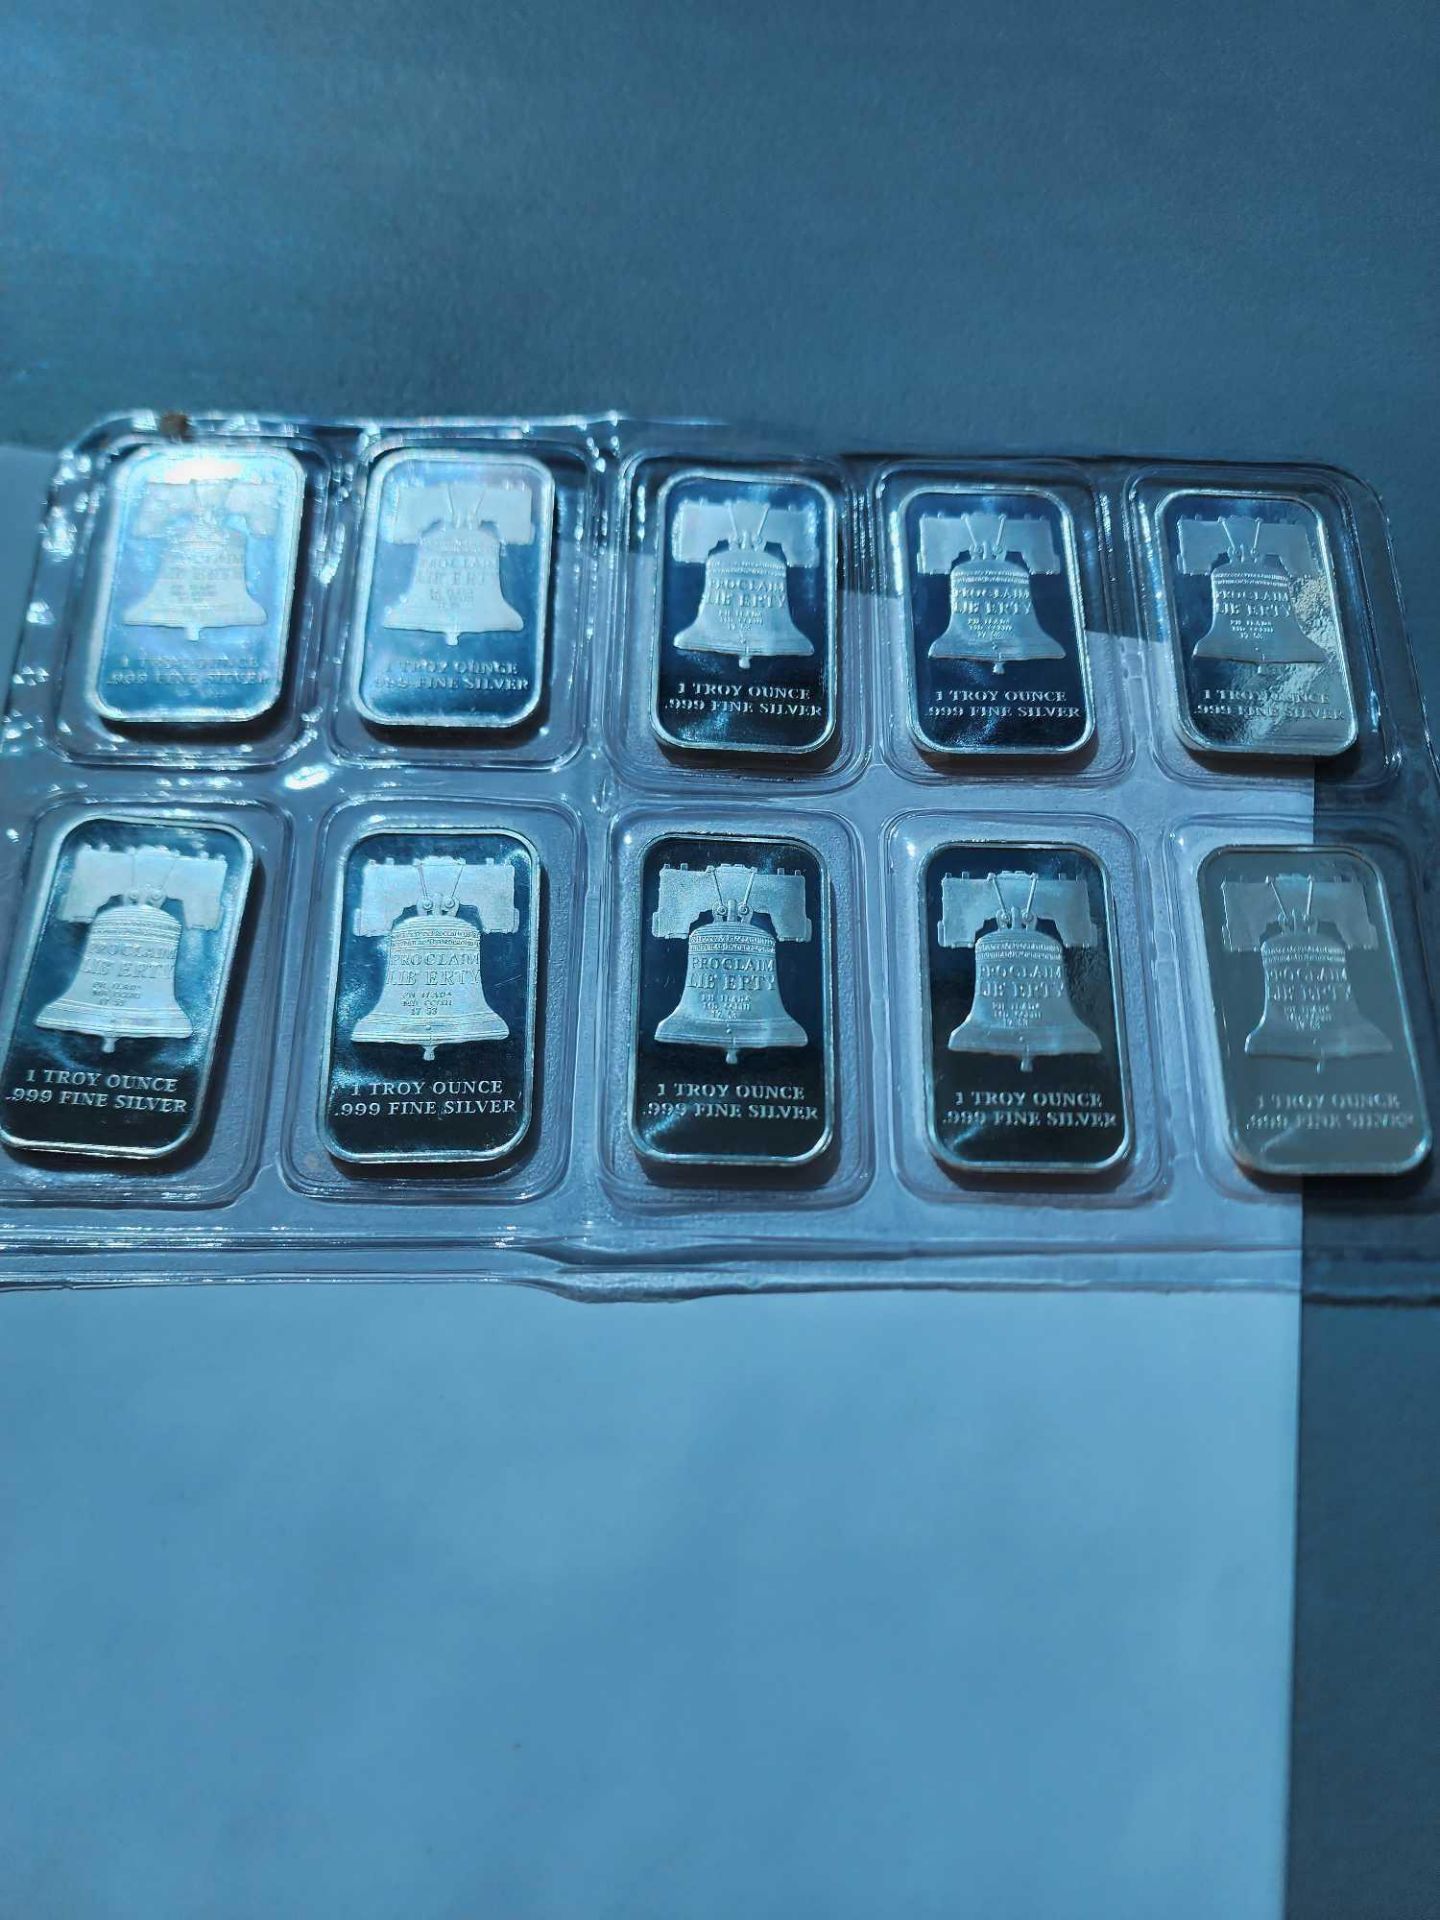 10 proclaim liberty silver bars in case